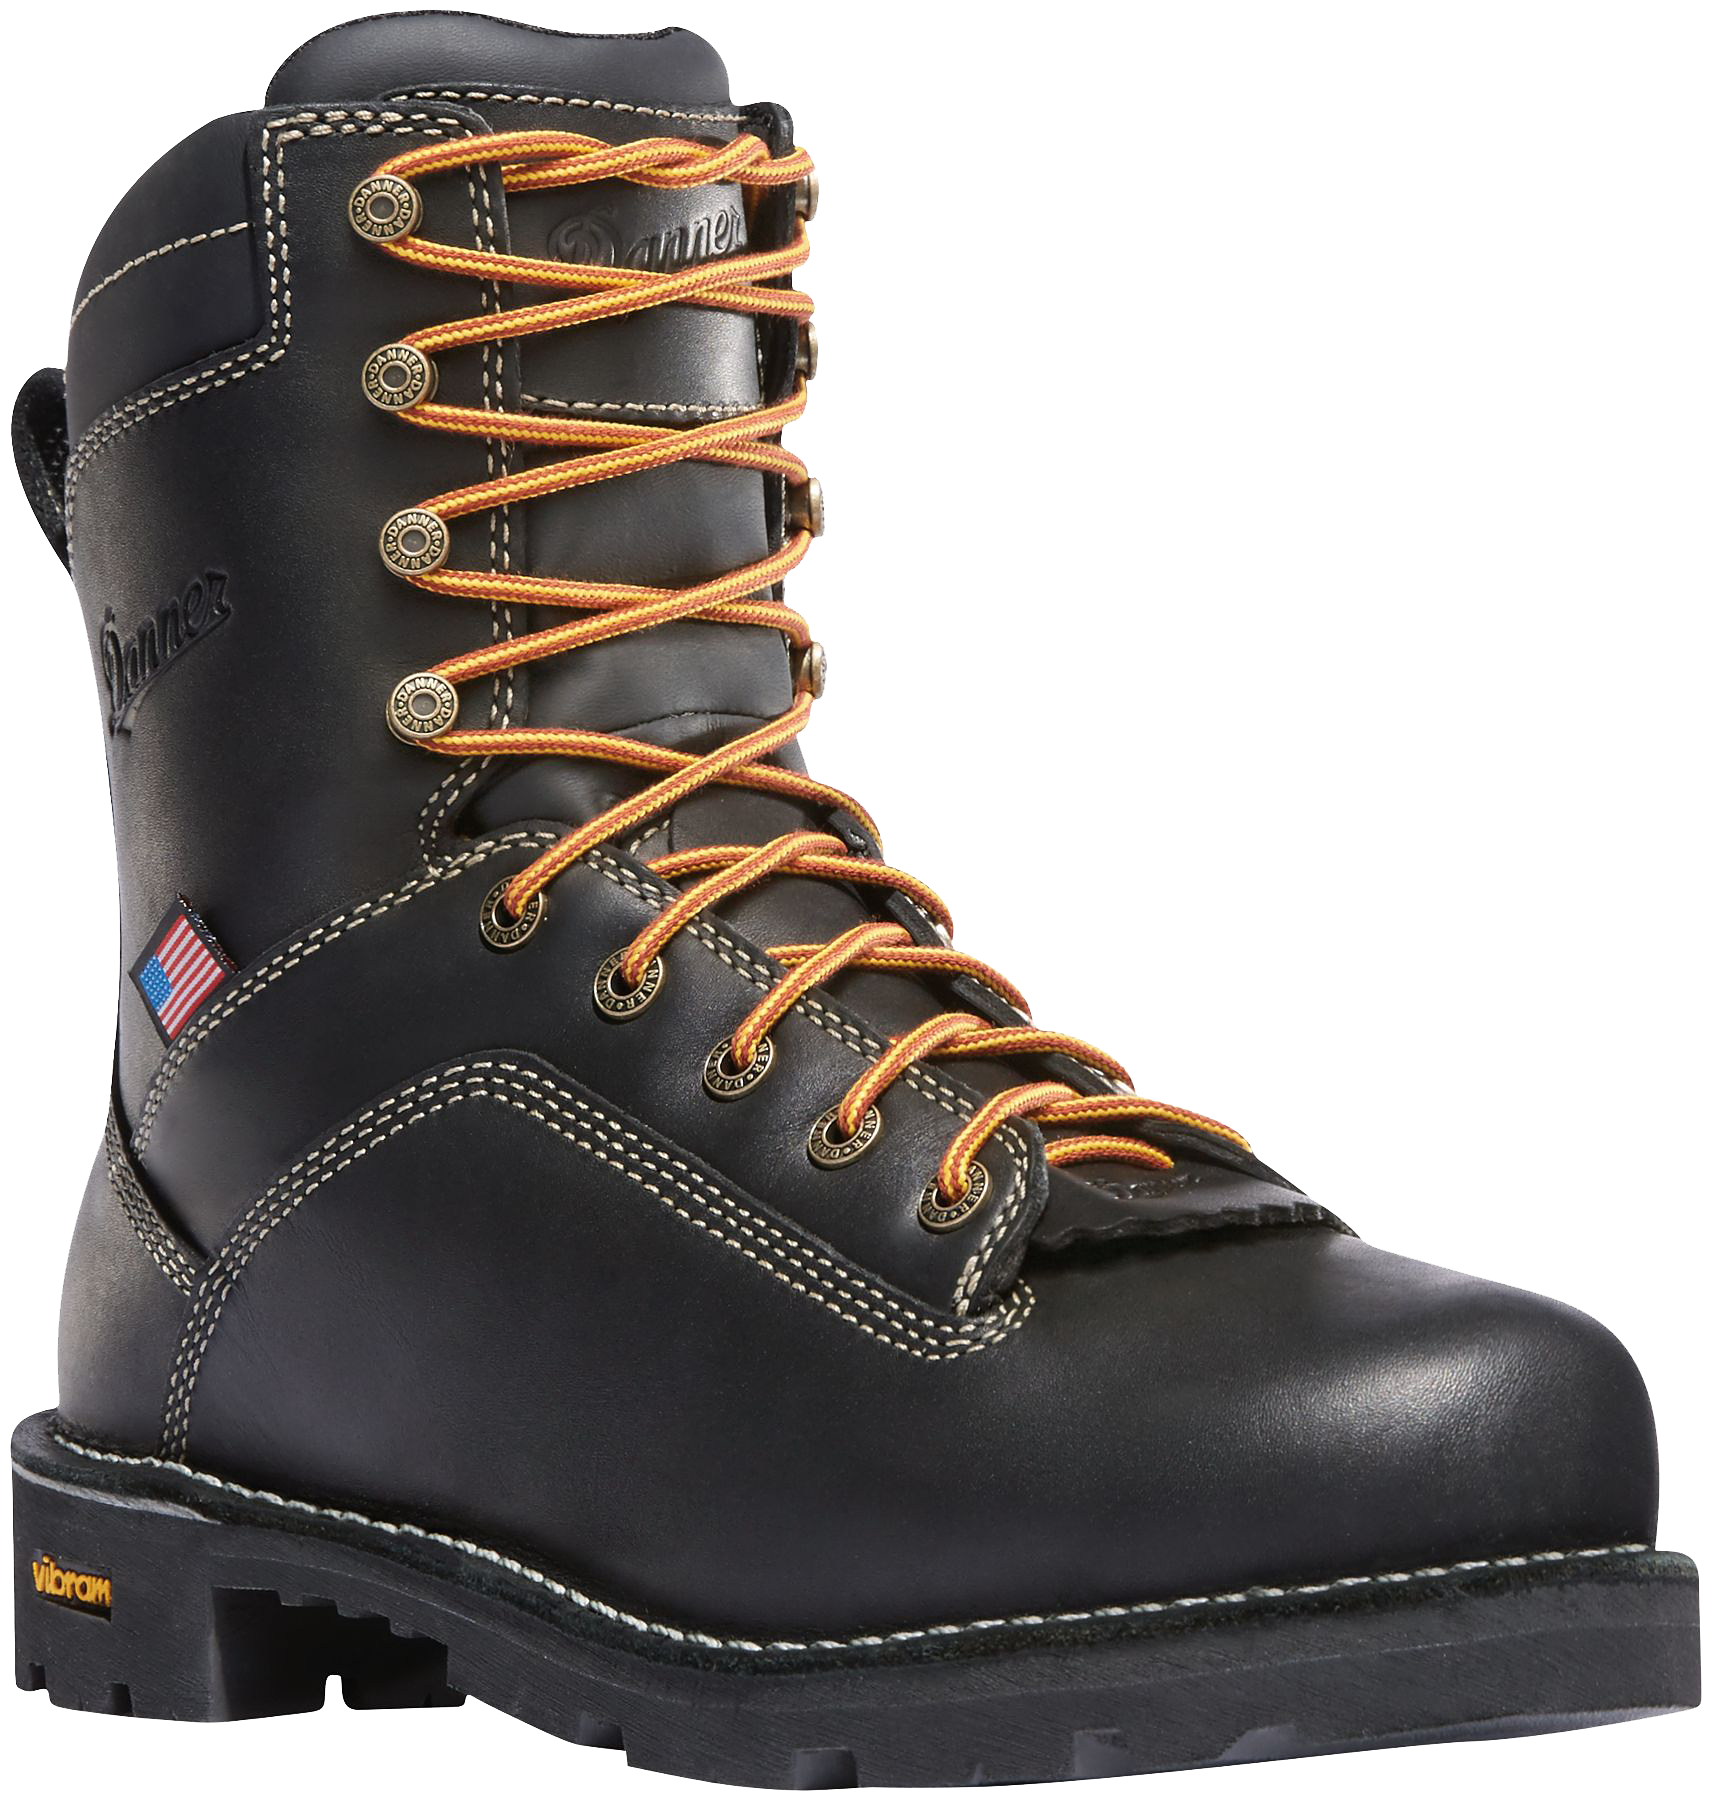 Danner Quarry USA Brown GORE-TEX Alloy Toe Work Boots for Men - Black - 11W